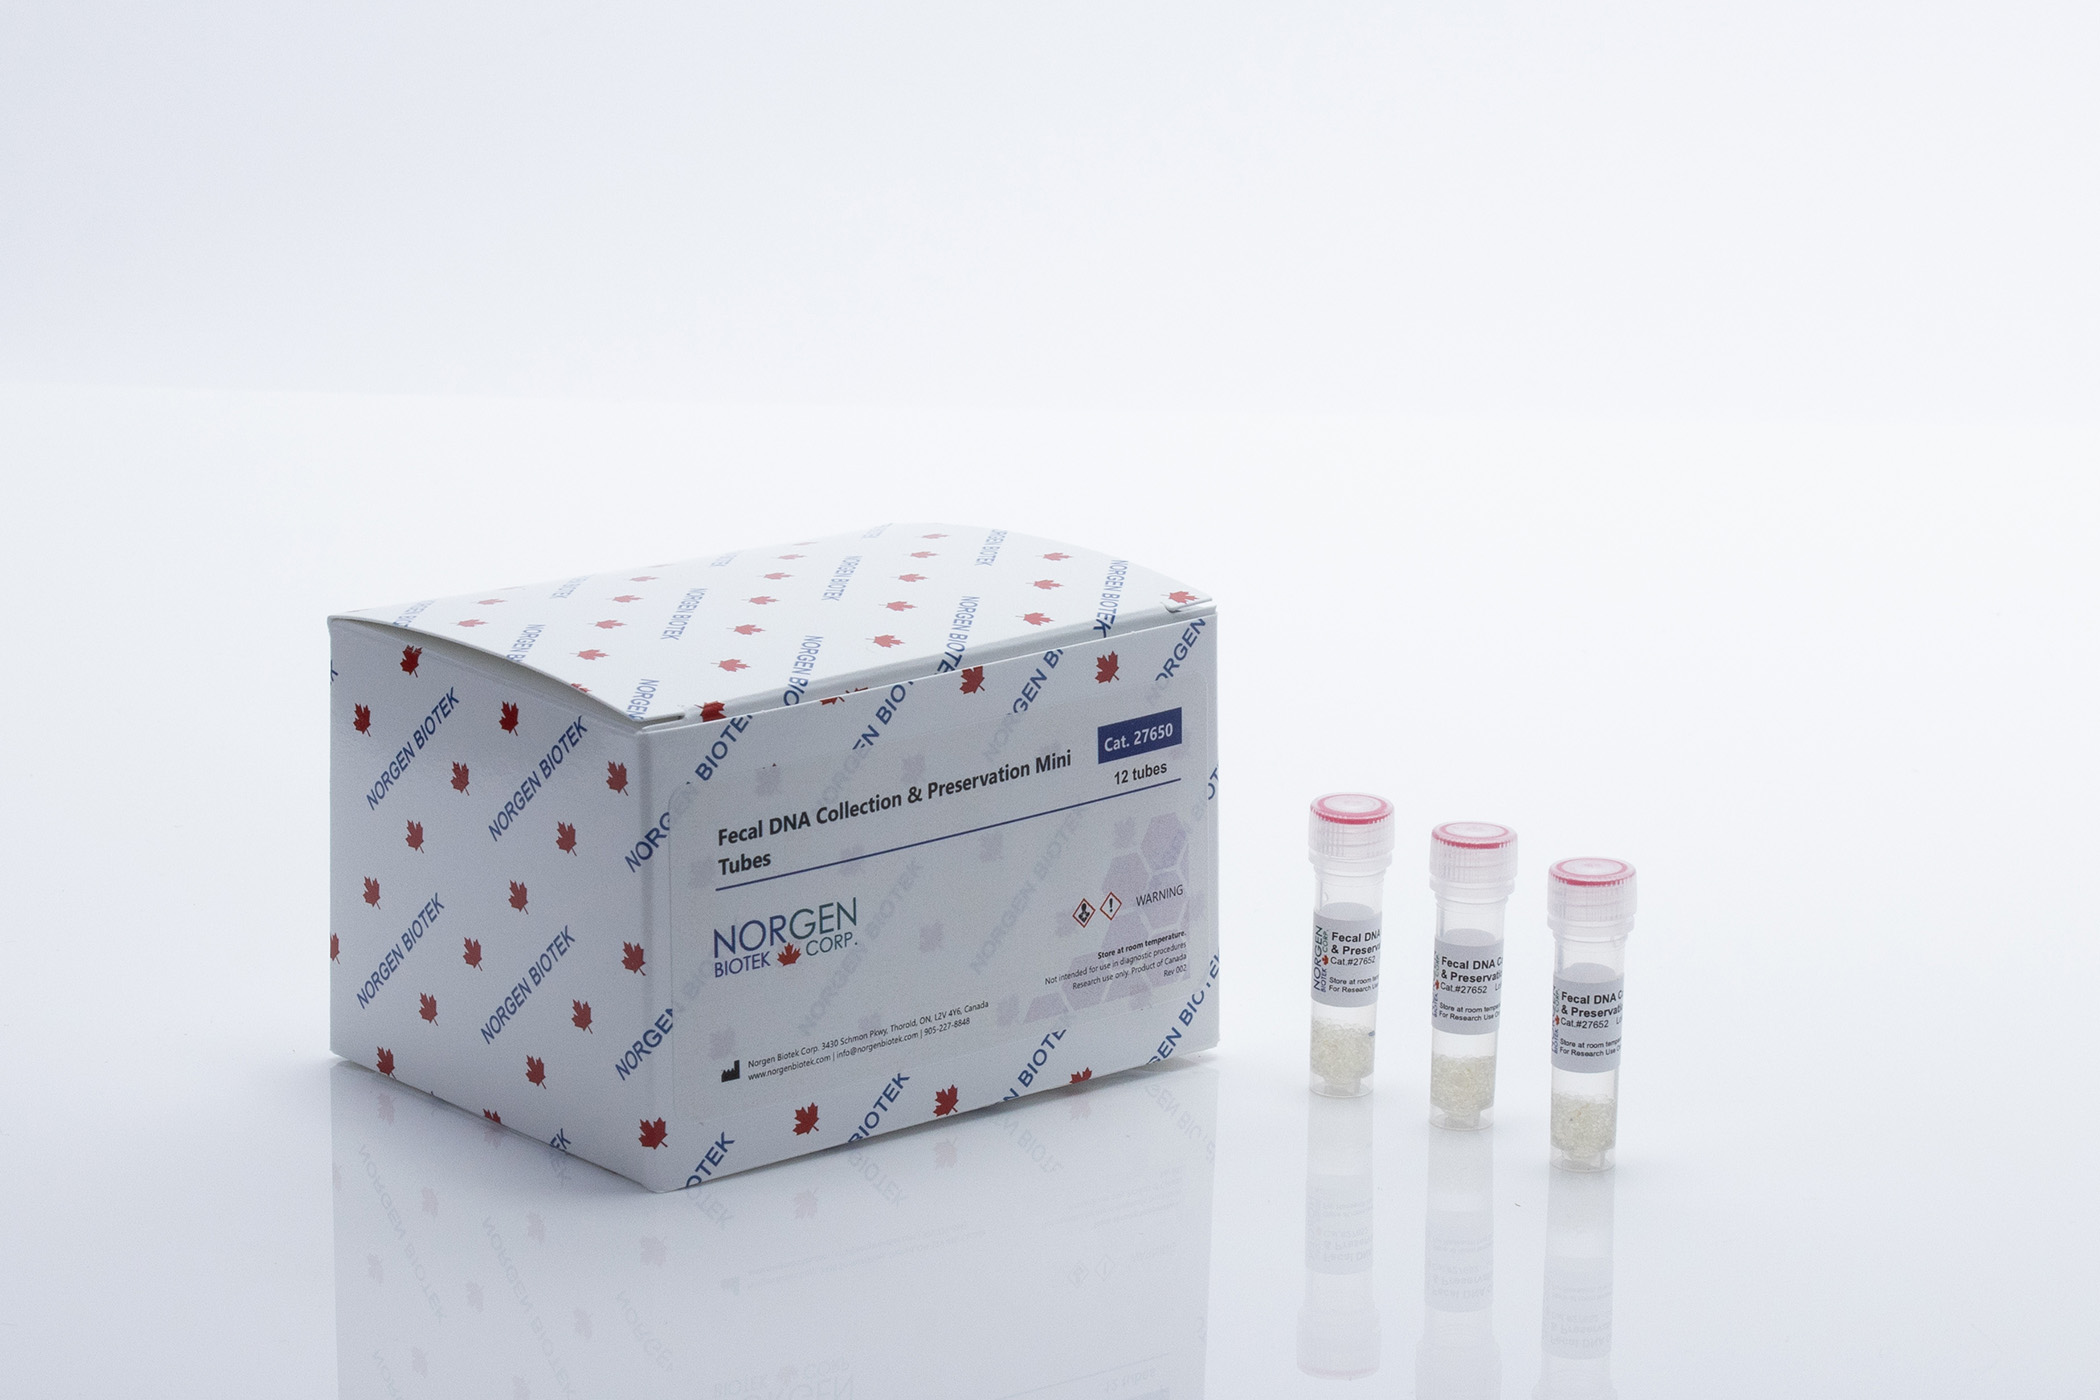 Fecal DNA Collection & Preservation Mini Tubes